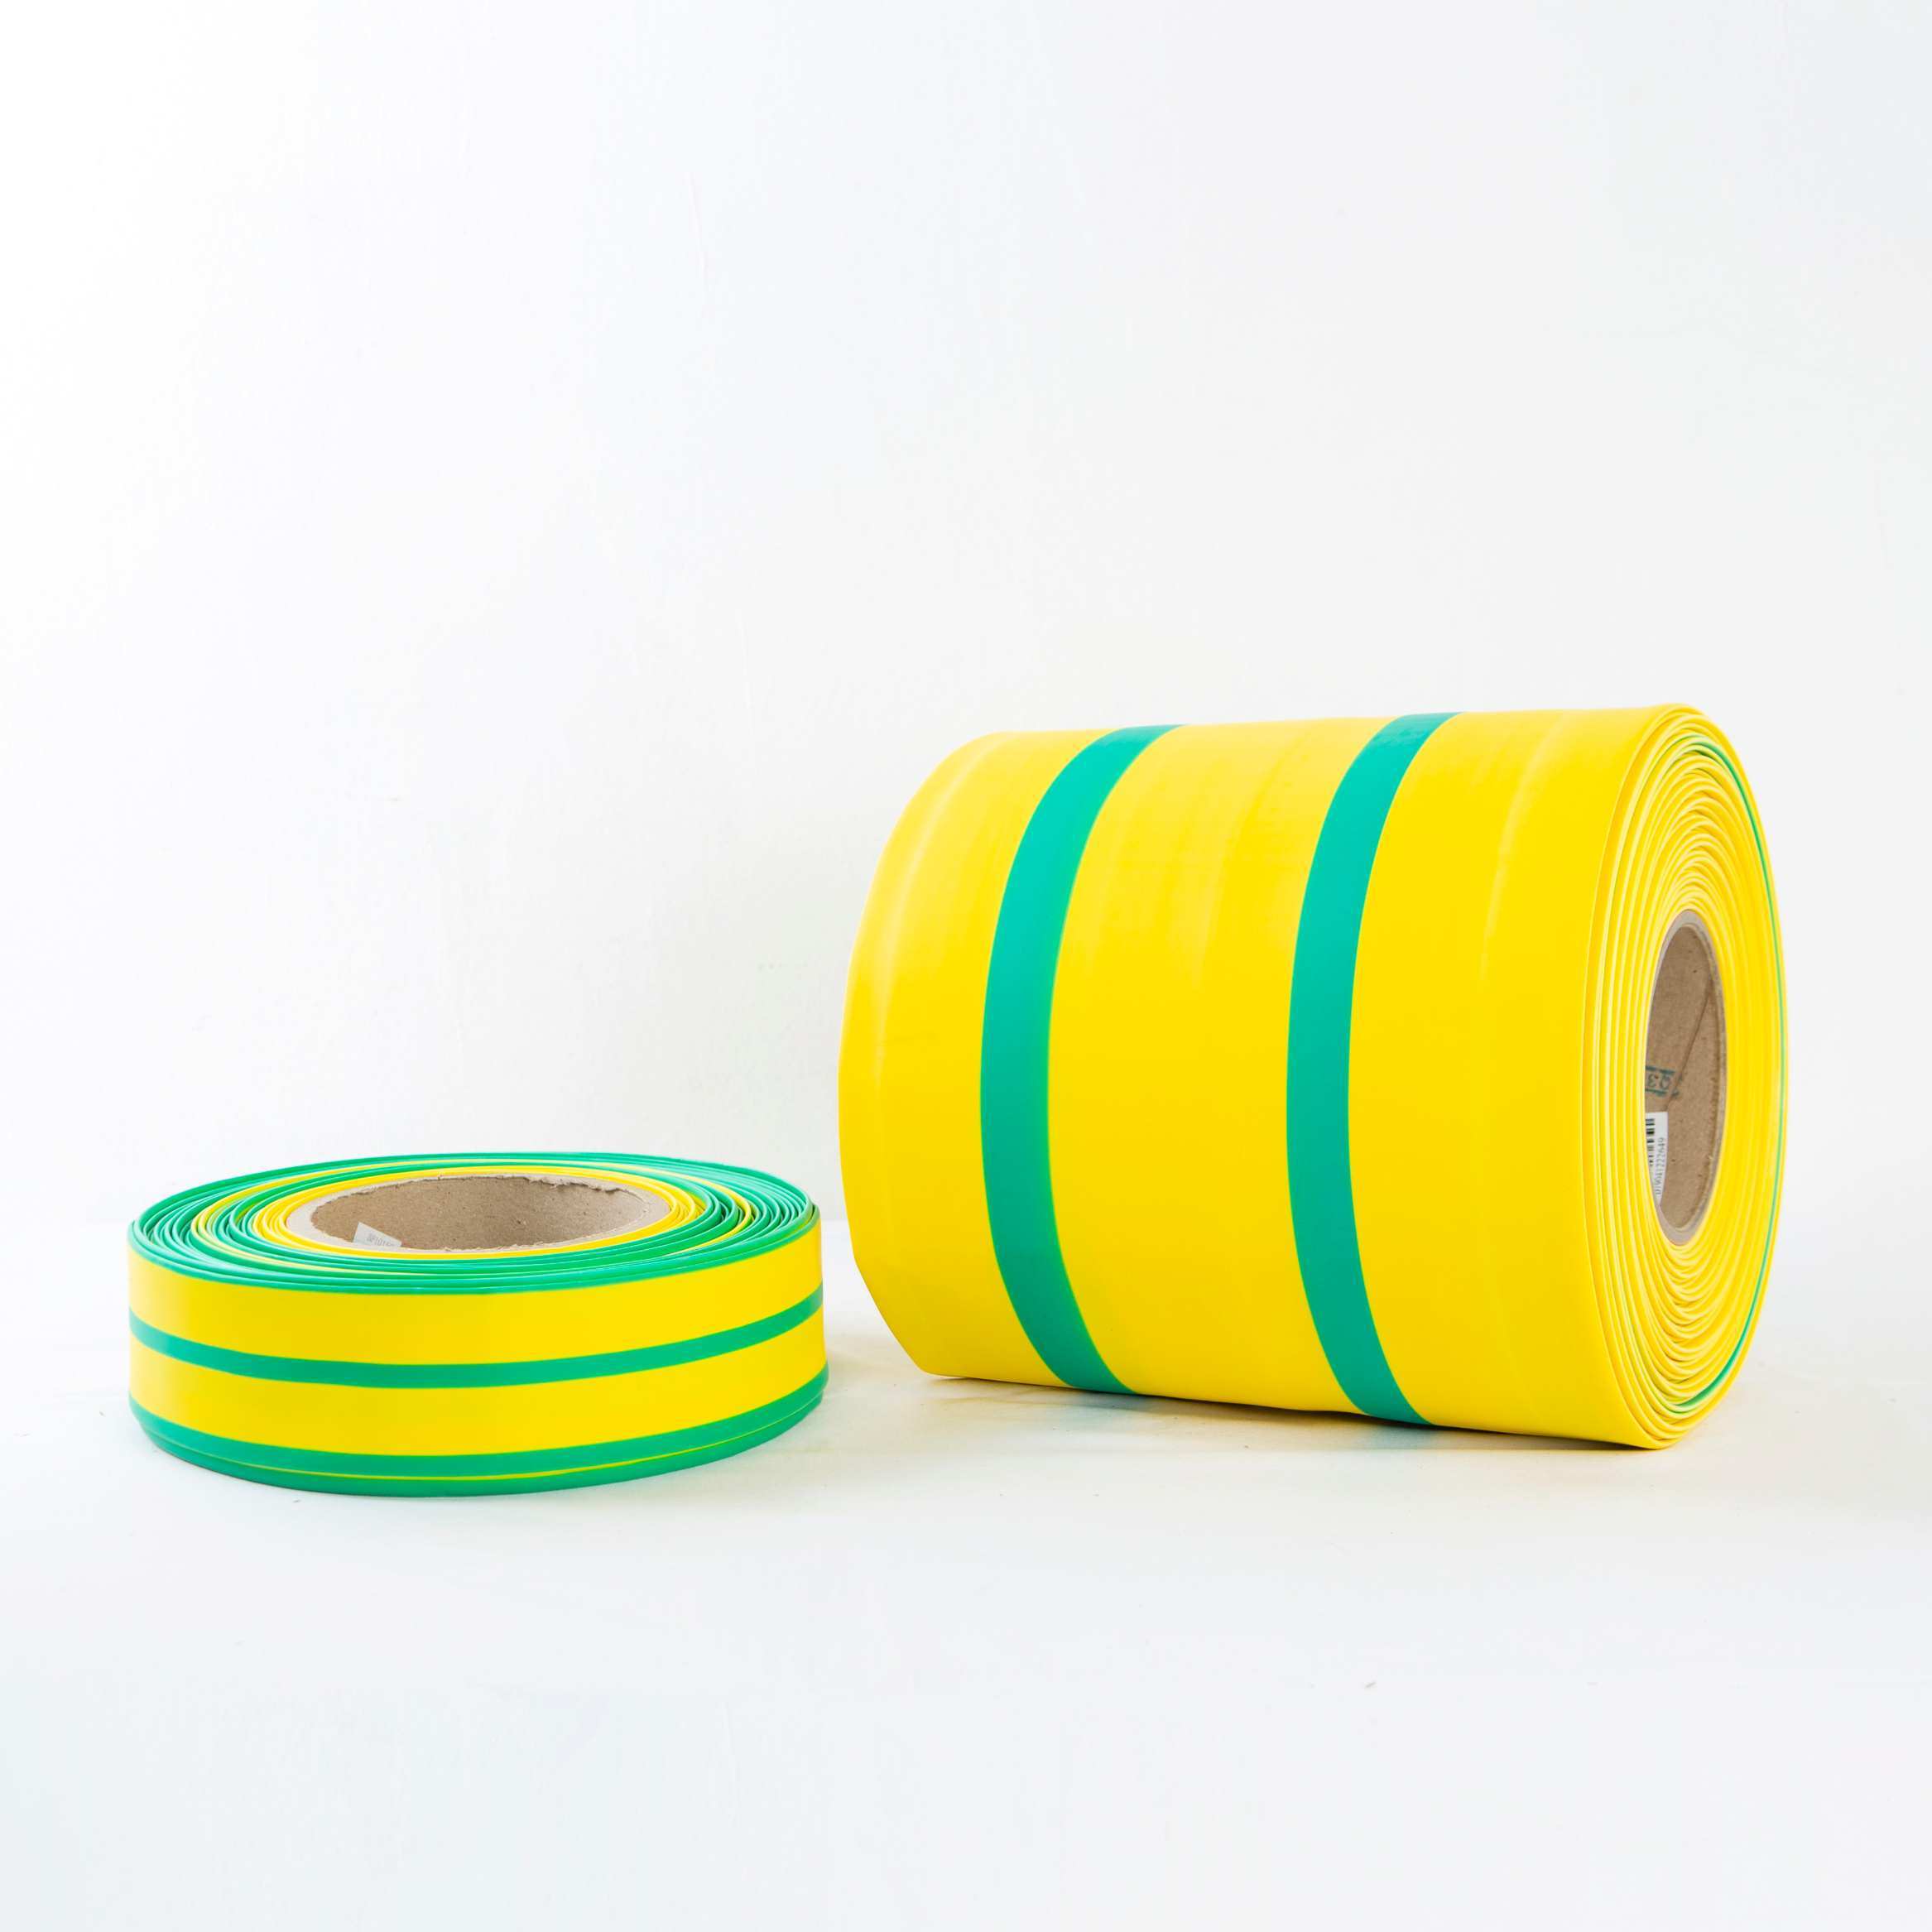 Factory Price Electrical Insulation Sleeving Heat Shrink Tubing Wire Insulation Sleeves